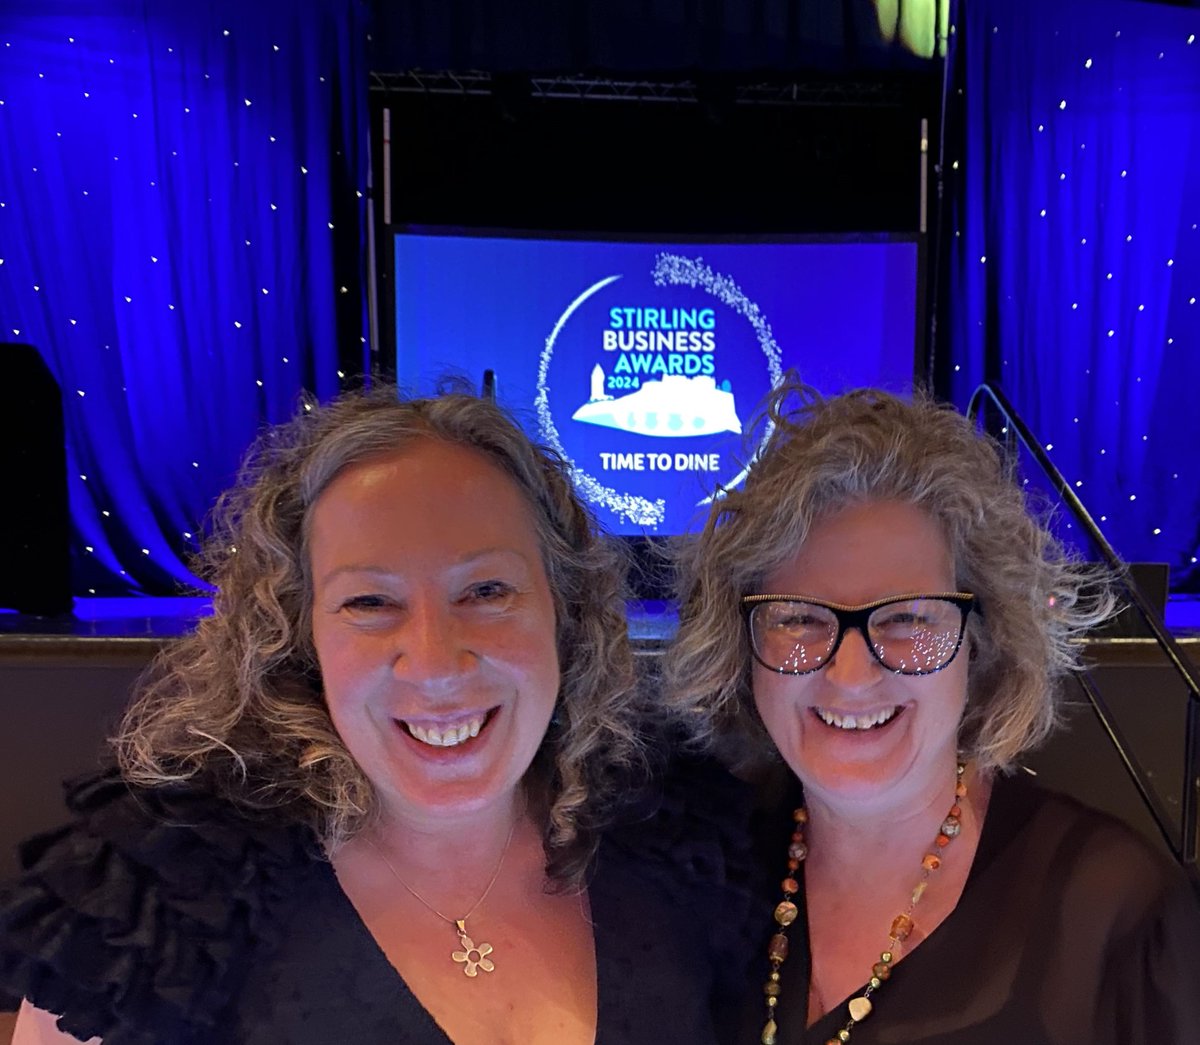 Had a lovely night at the Stirling Business Awards organised by @GoForthStirling. A behind-the-scenes photo with my friend Janie Meikle Bland founder of Stirling Photography Festival - one of the finalists for the Outstanding Contribution to Stirling Award. #stirling #Awards